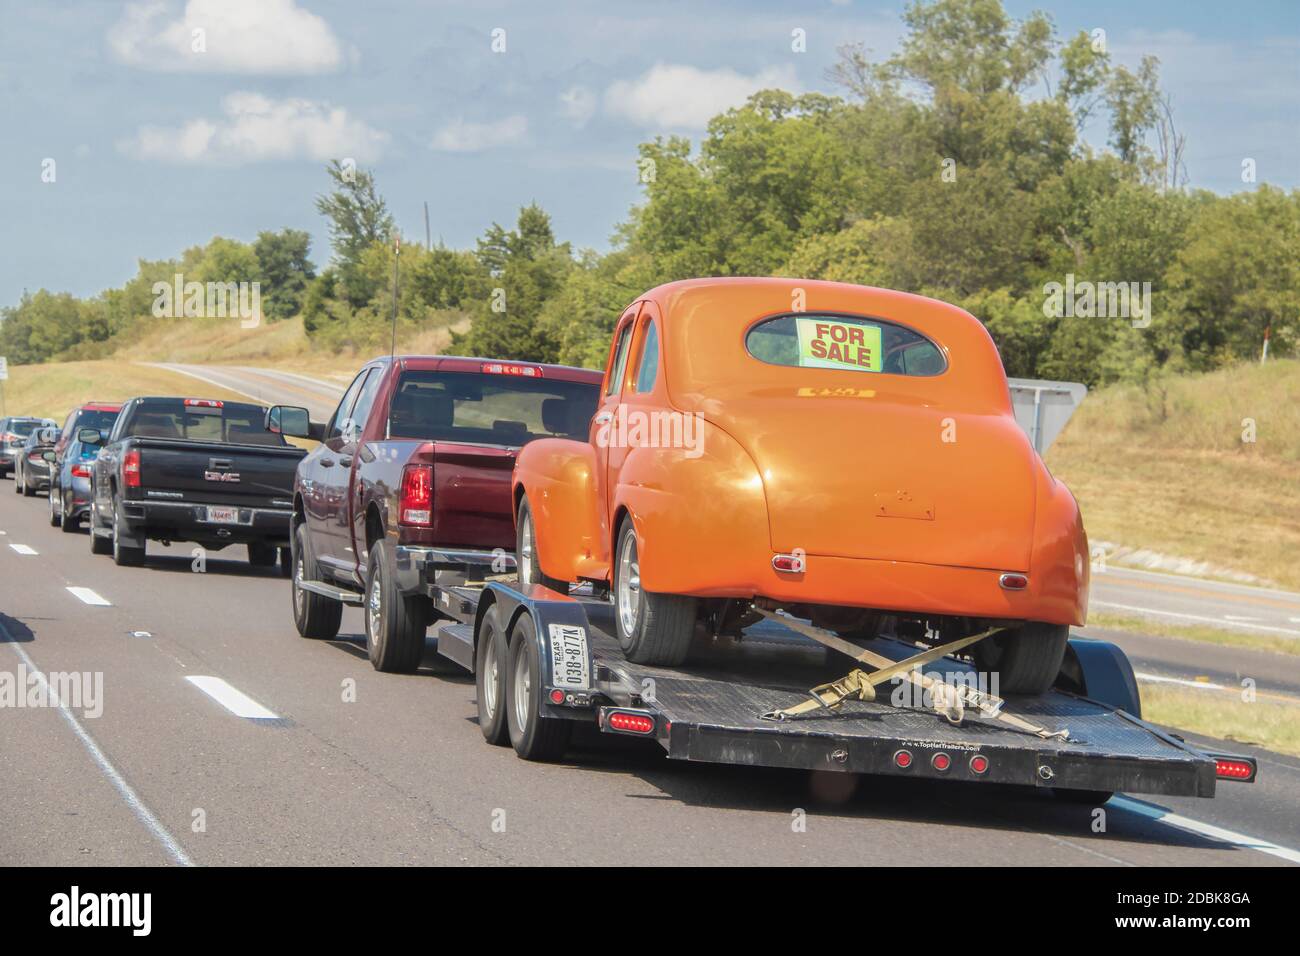 Aug 13 2019 Ft Worth USA Line of cars and trucks on highway - back one pulls trailer with orange vintage car strapped on with For Sale sign in back wi Stock Photo